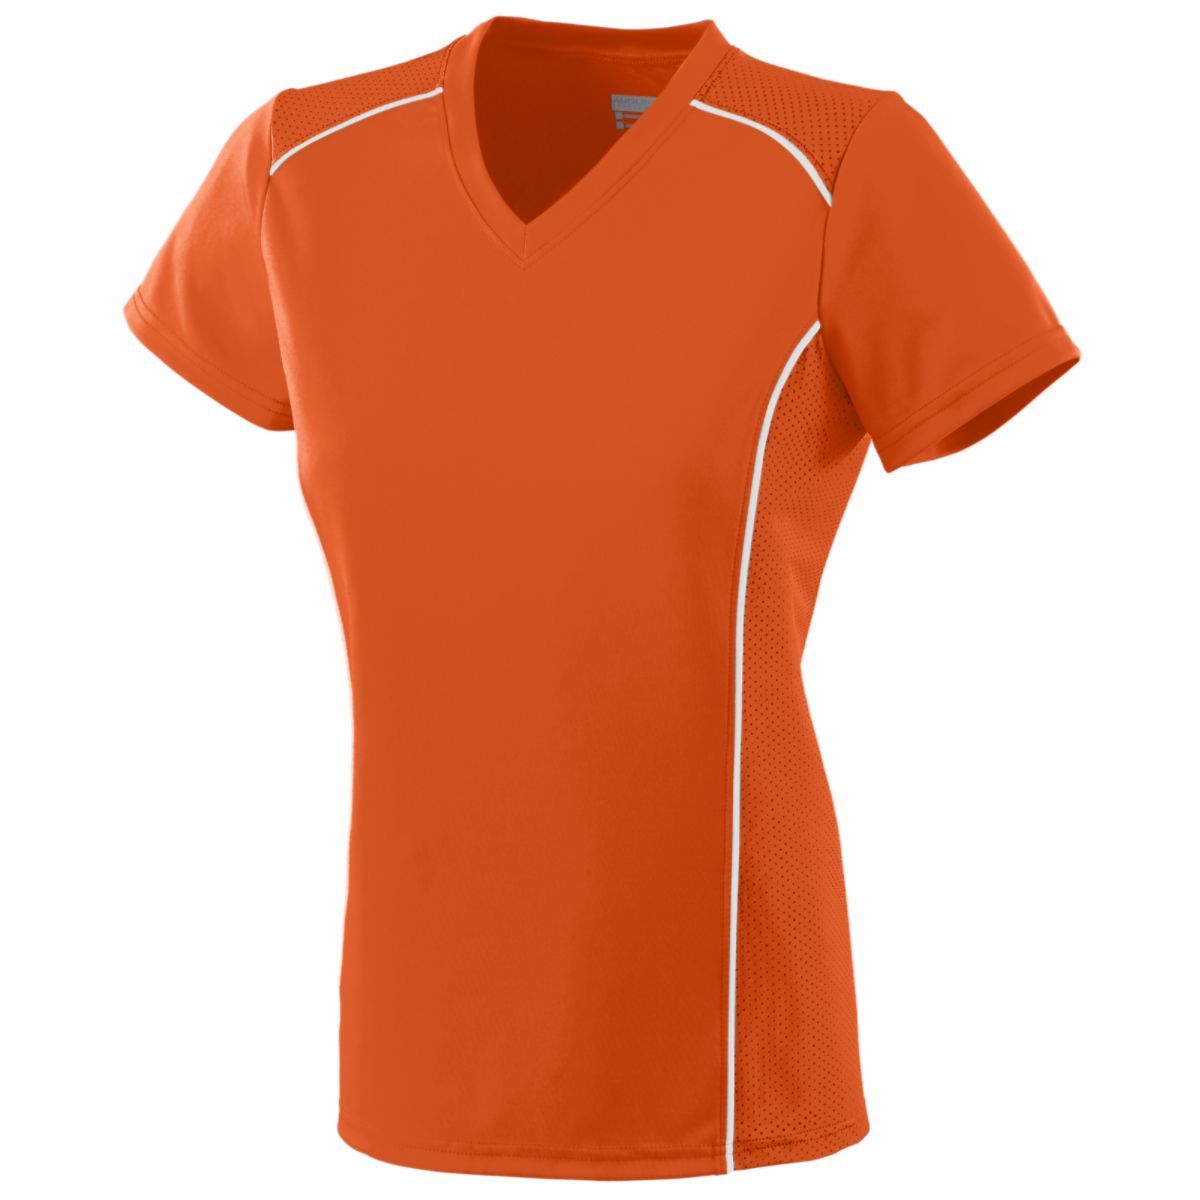 Augusta Sportswear Girls Winning Streak Jersey in Orange/White  -Part of the Girls, Augusta-Products, Soccer, Girls-Jersey, Shirts, All-Sports-1 product lines at KanaleyCreations.com